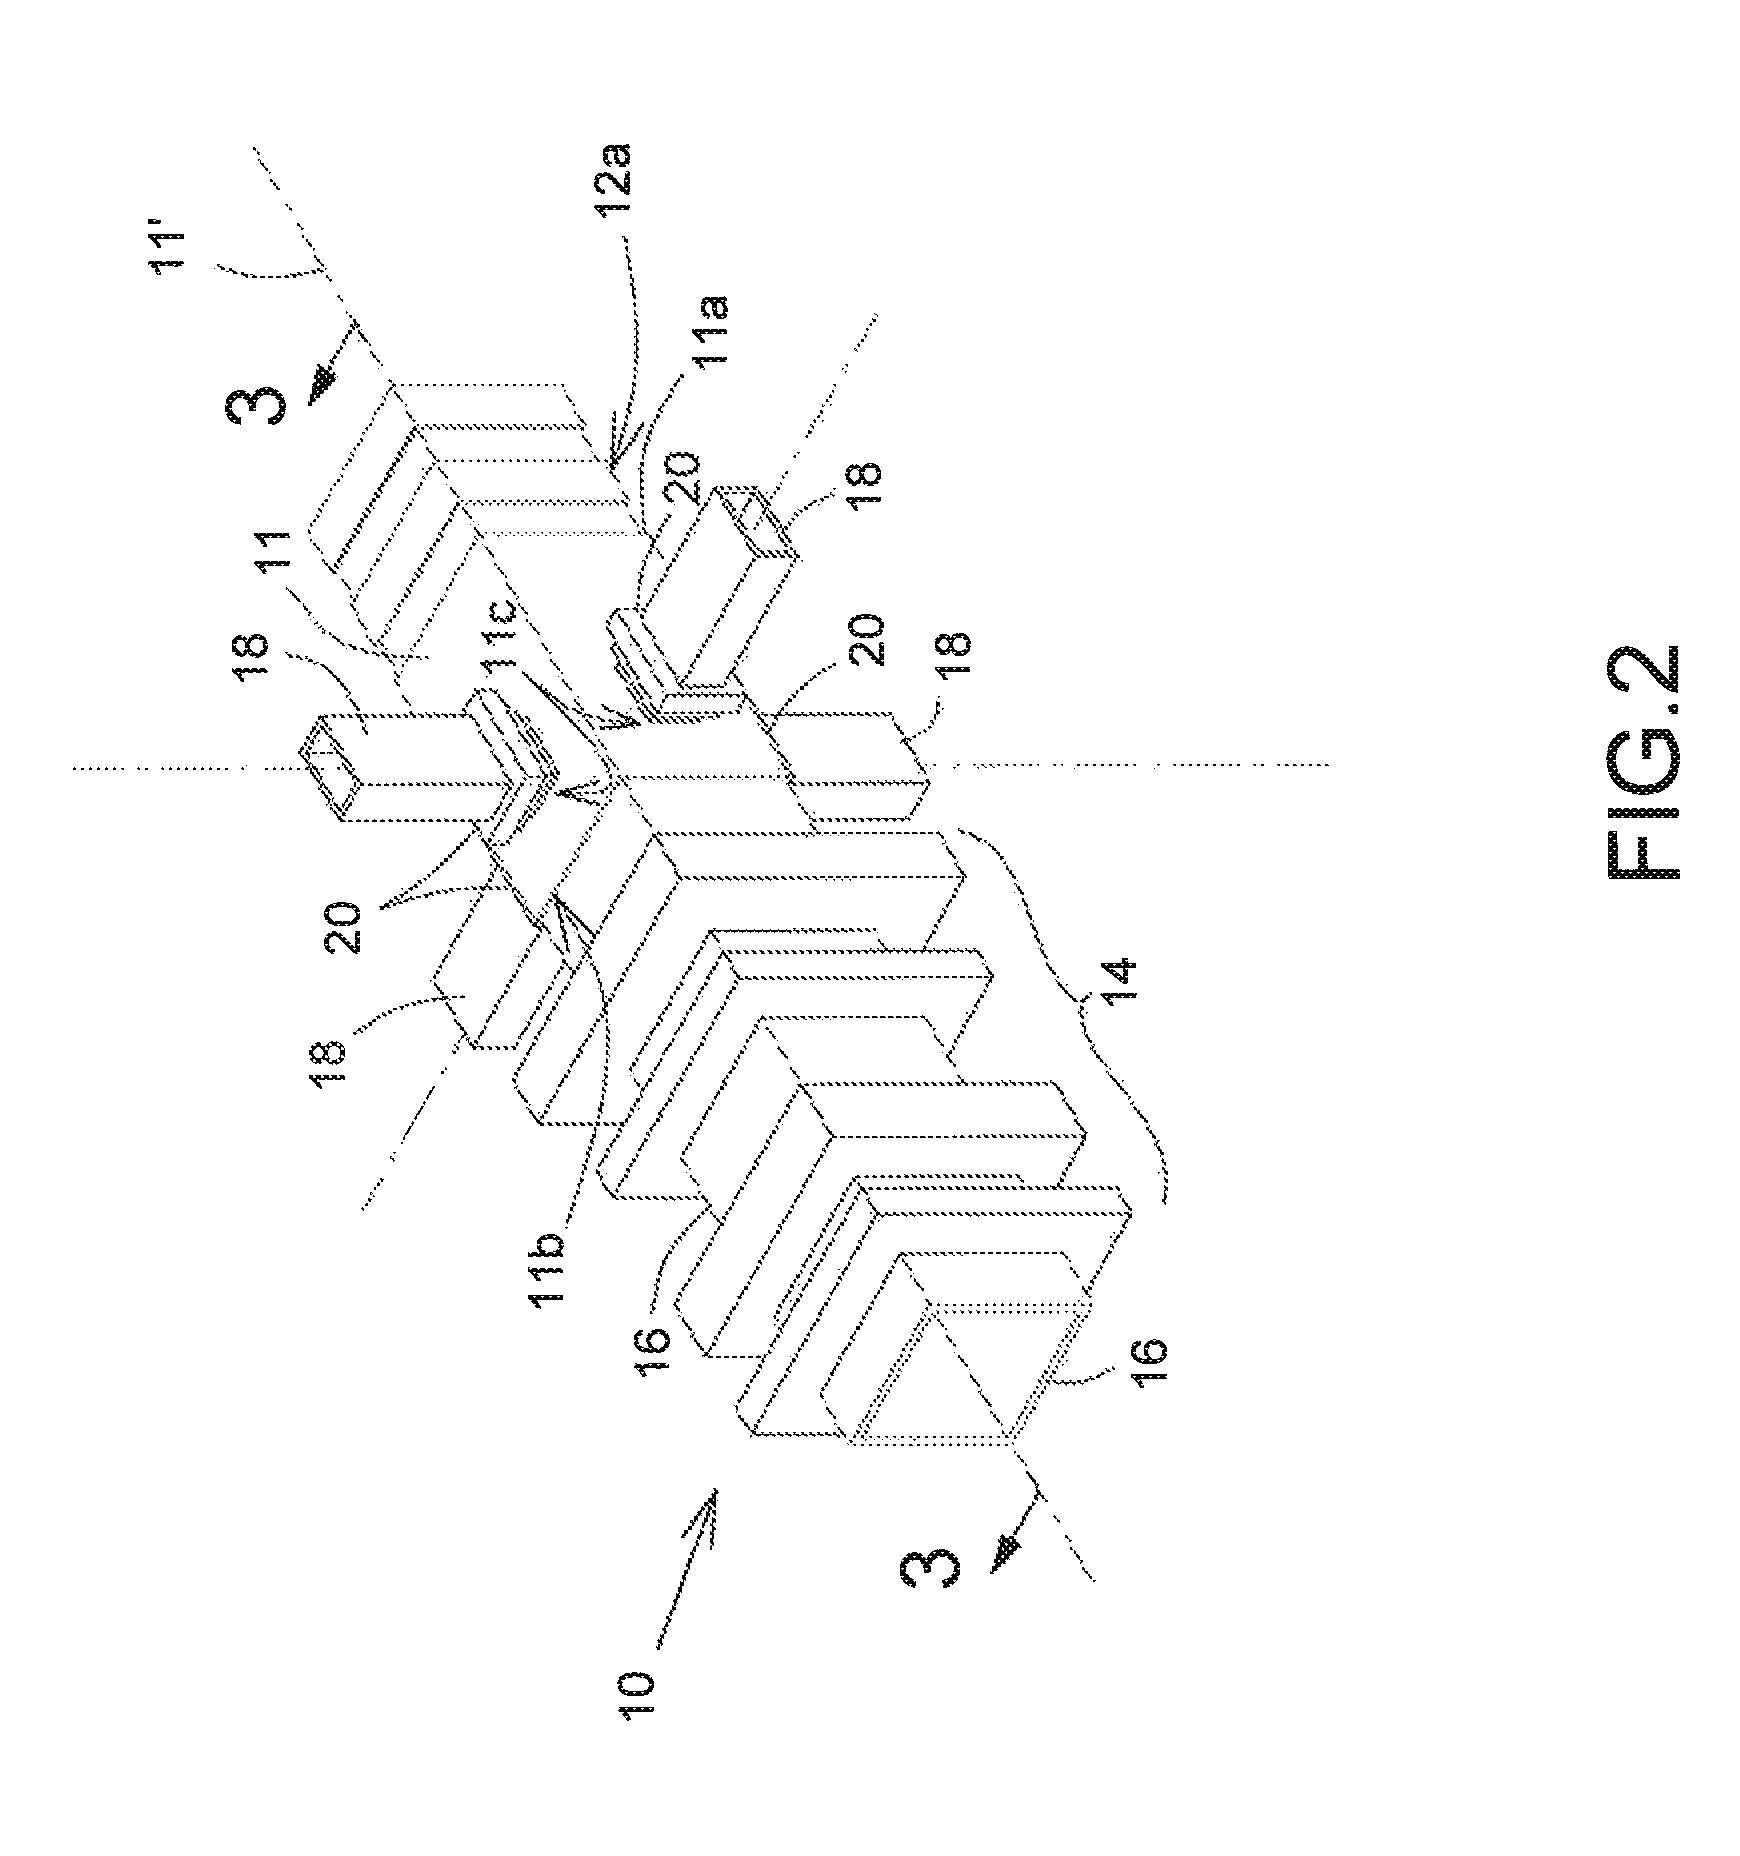 Orthomode junction assembly with associated filters for use in an antenna feed system